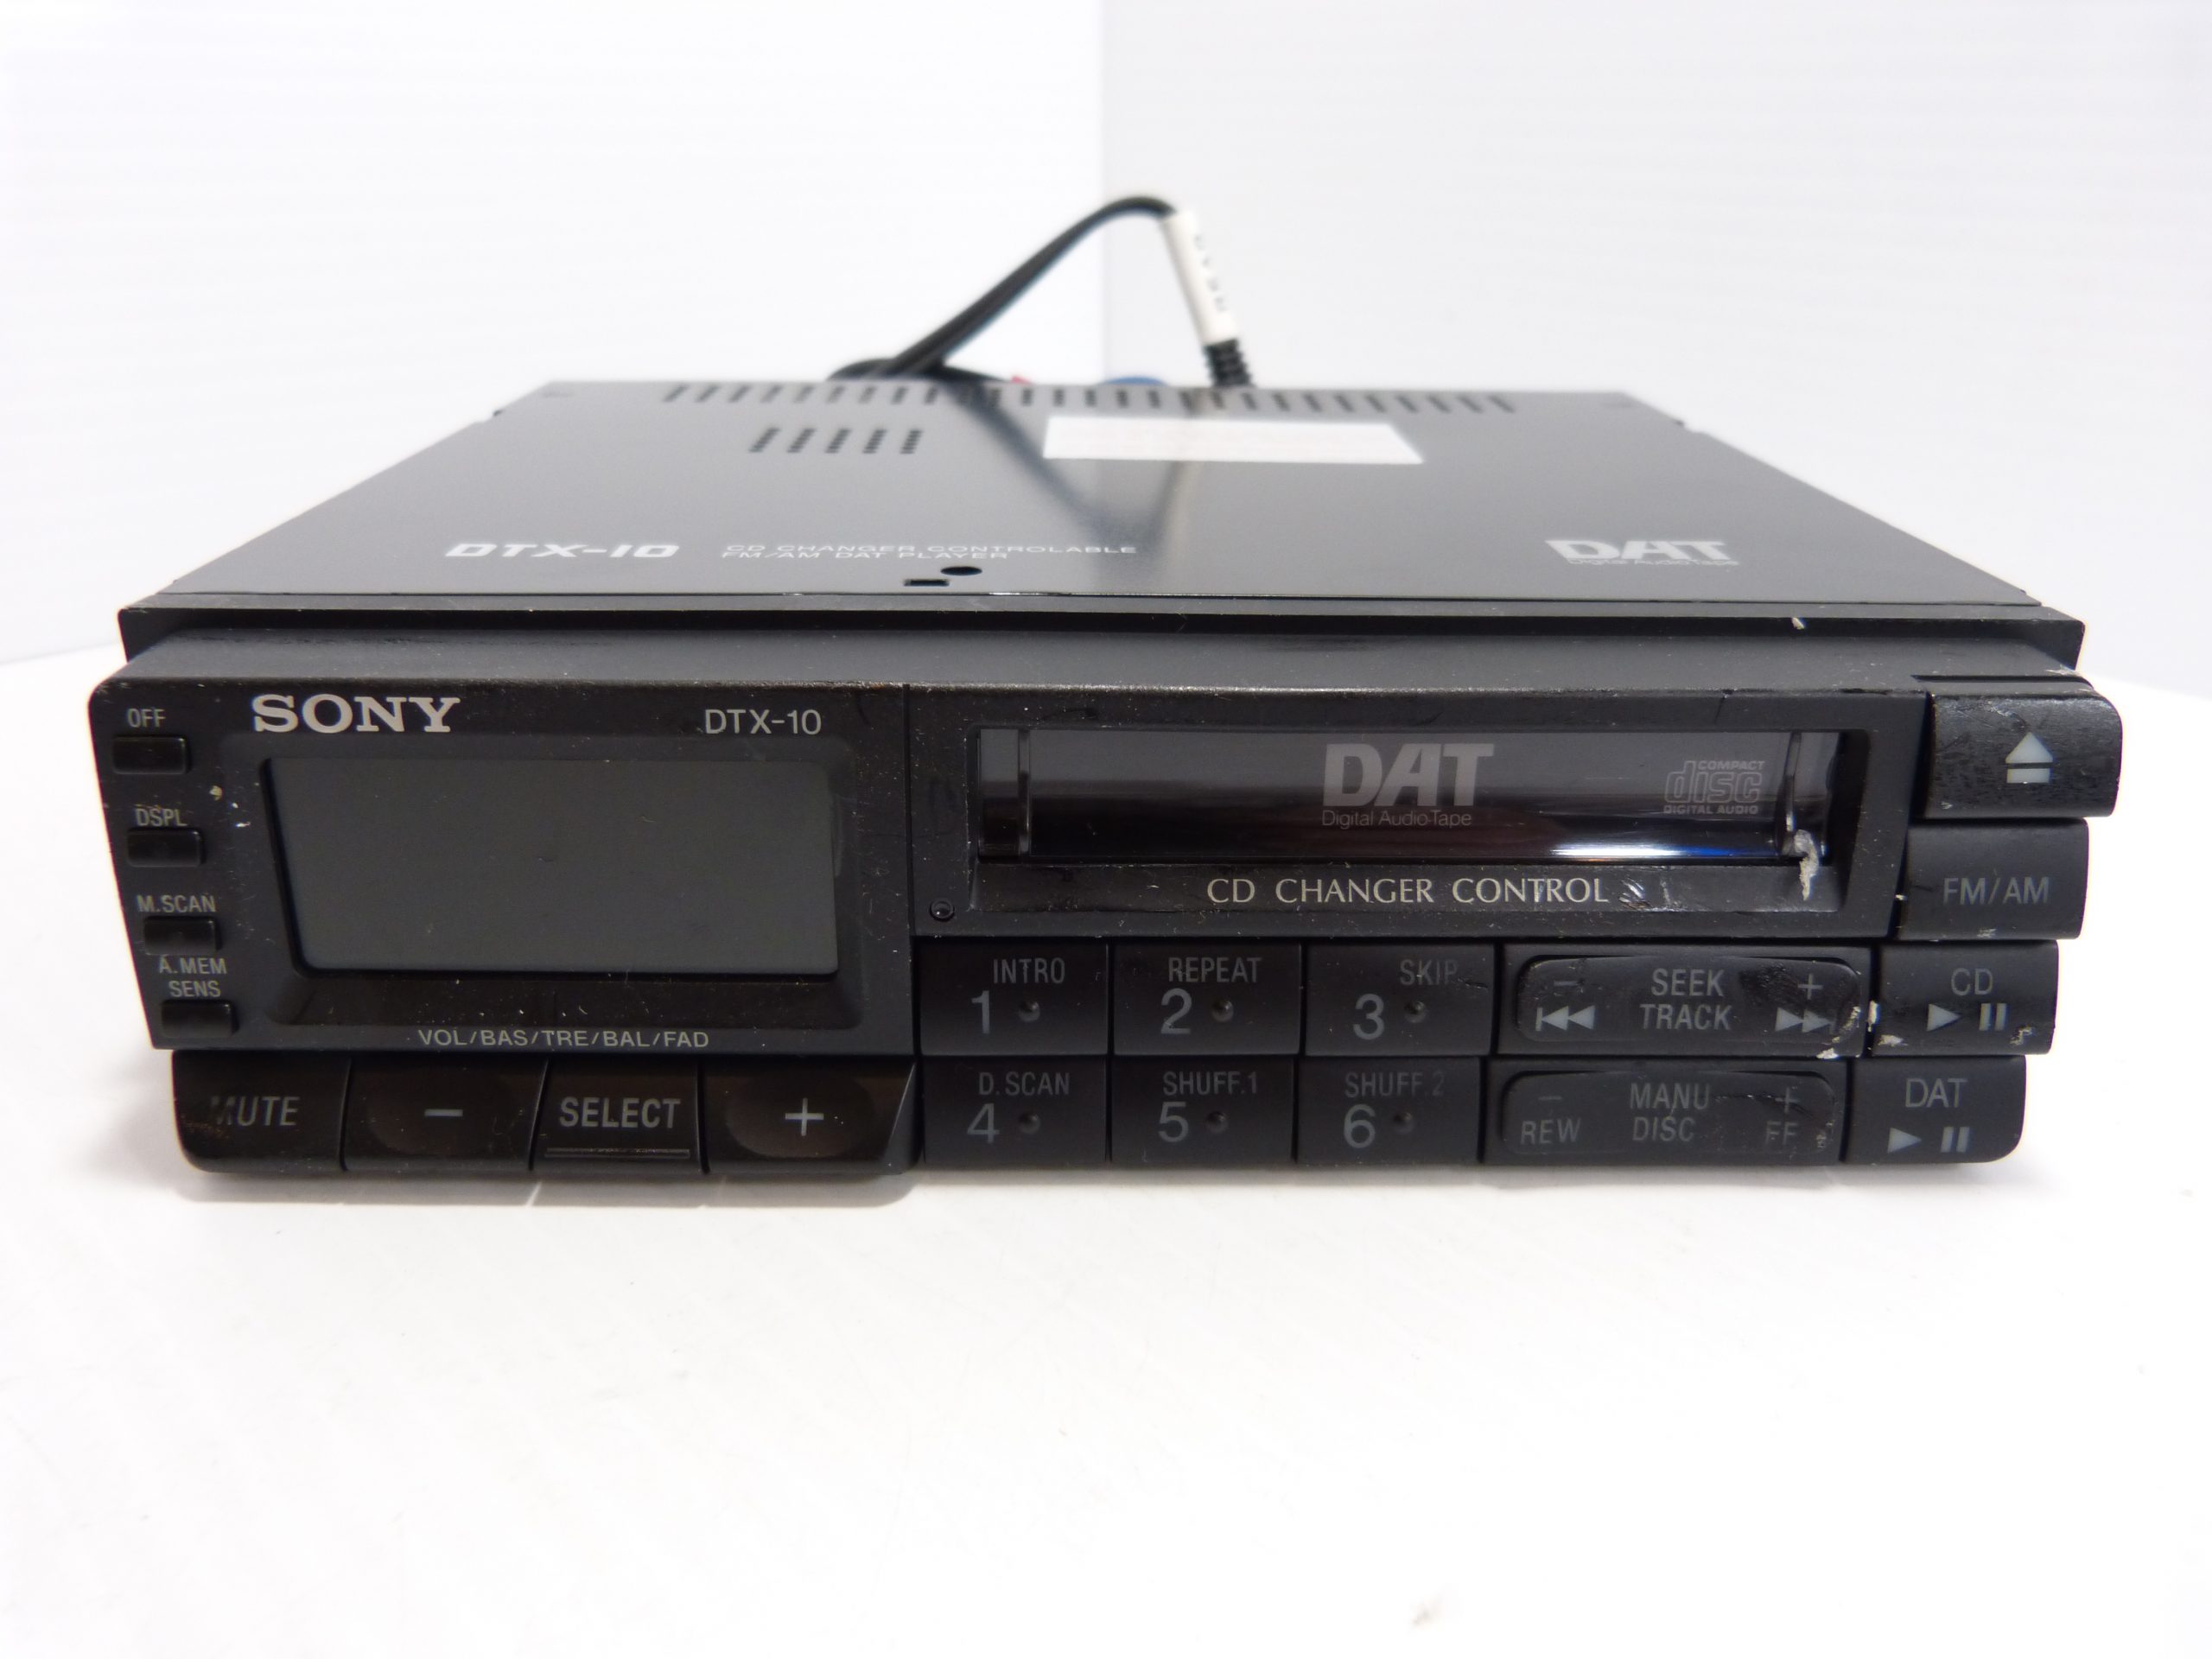 Sony DTX-10 Car FM/AM DAT Player Boxed